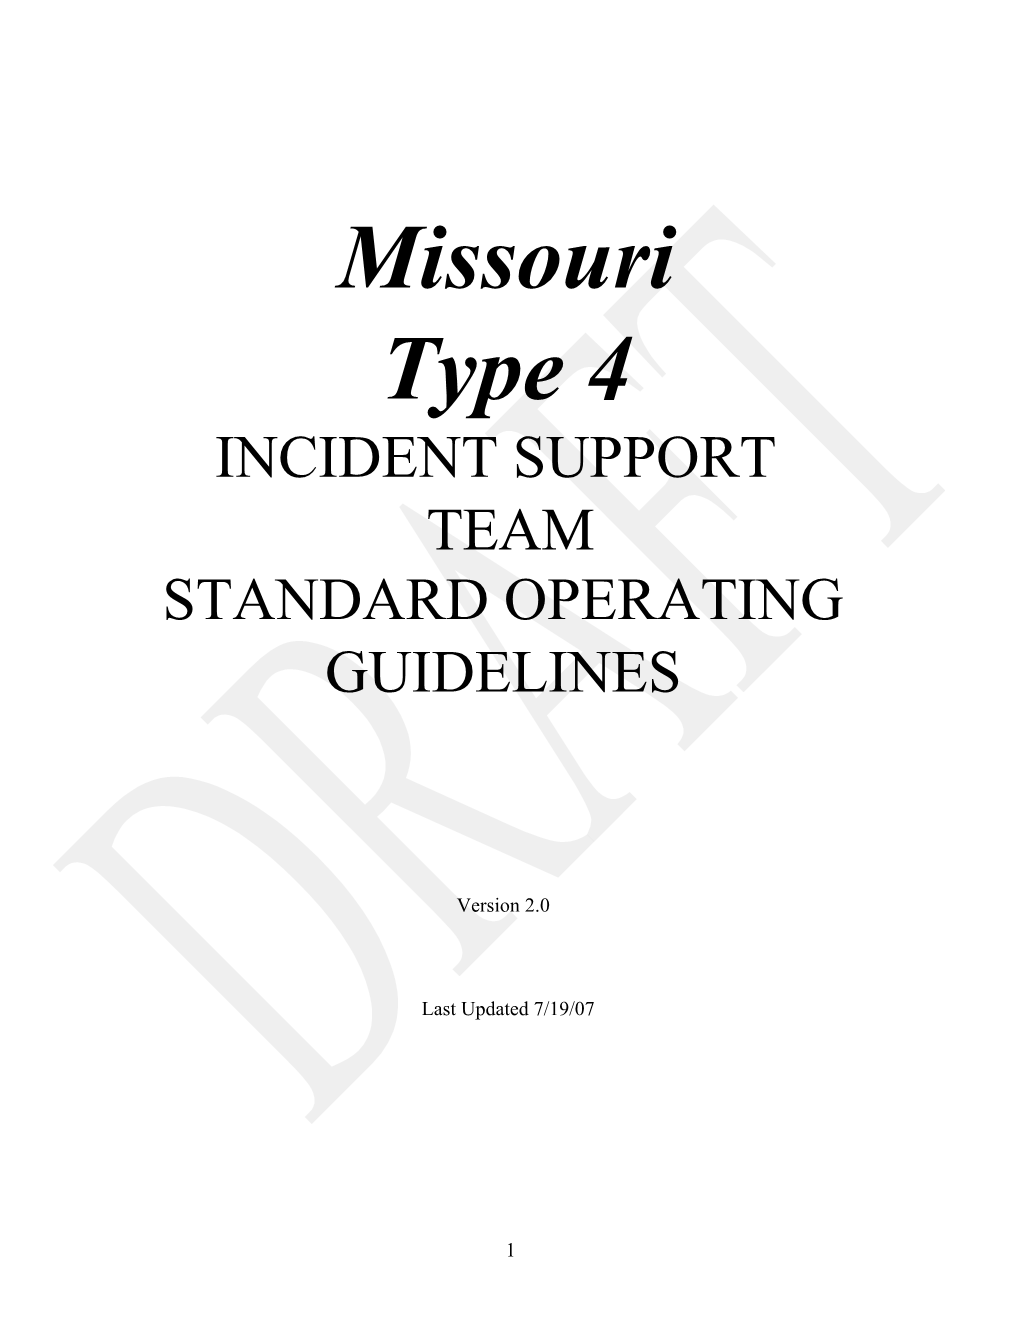 Incident Support